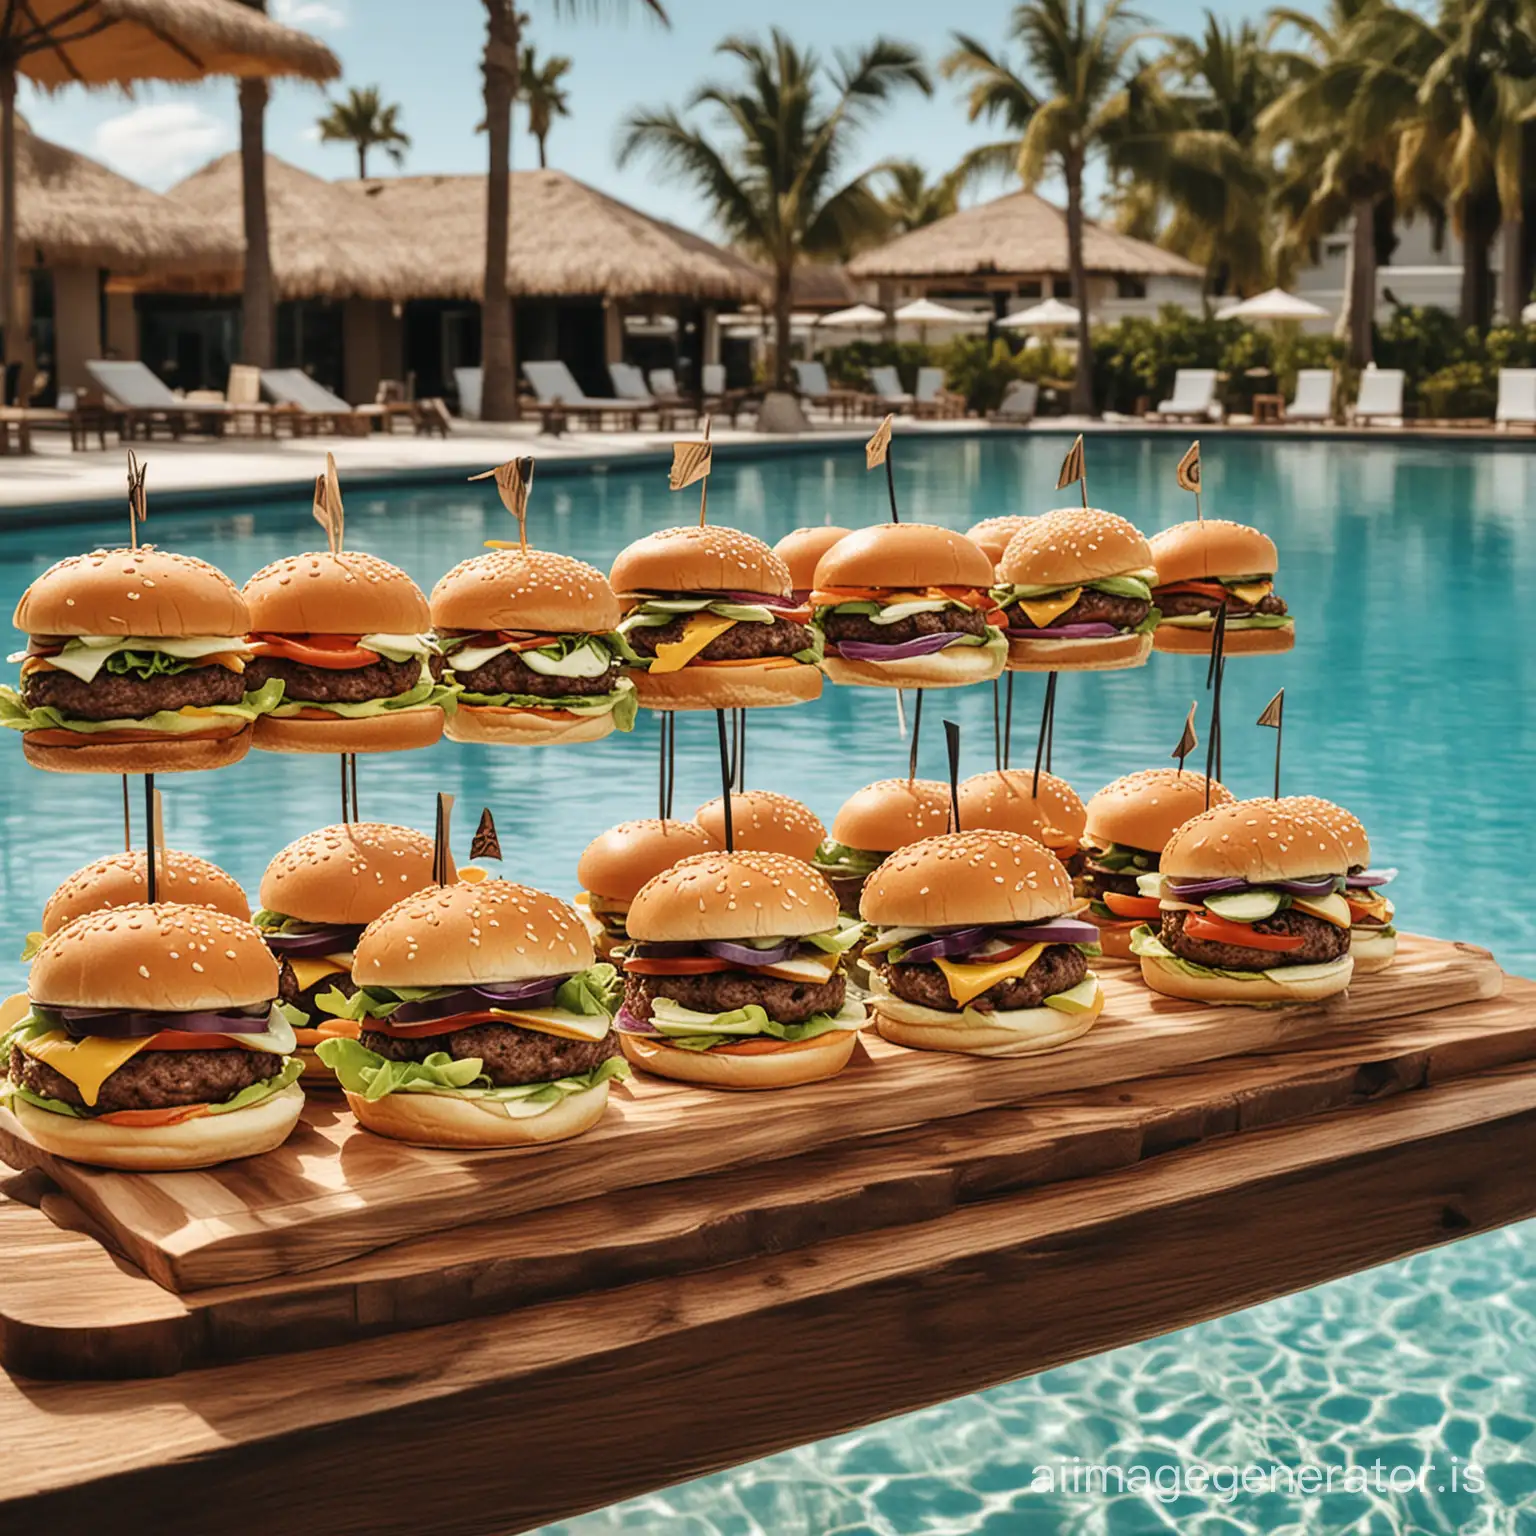 Artistic-Burger-Presentation-by-the-Poolside